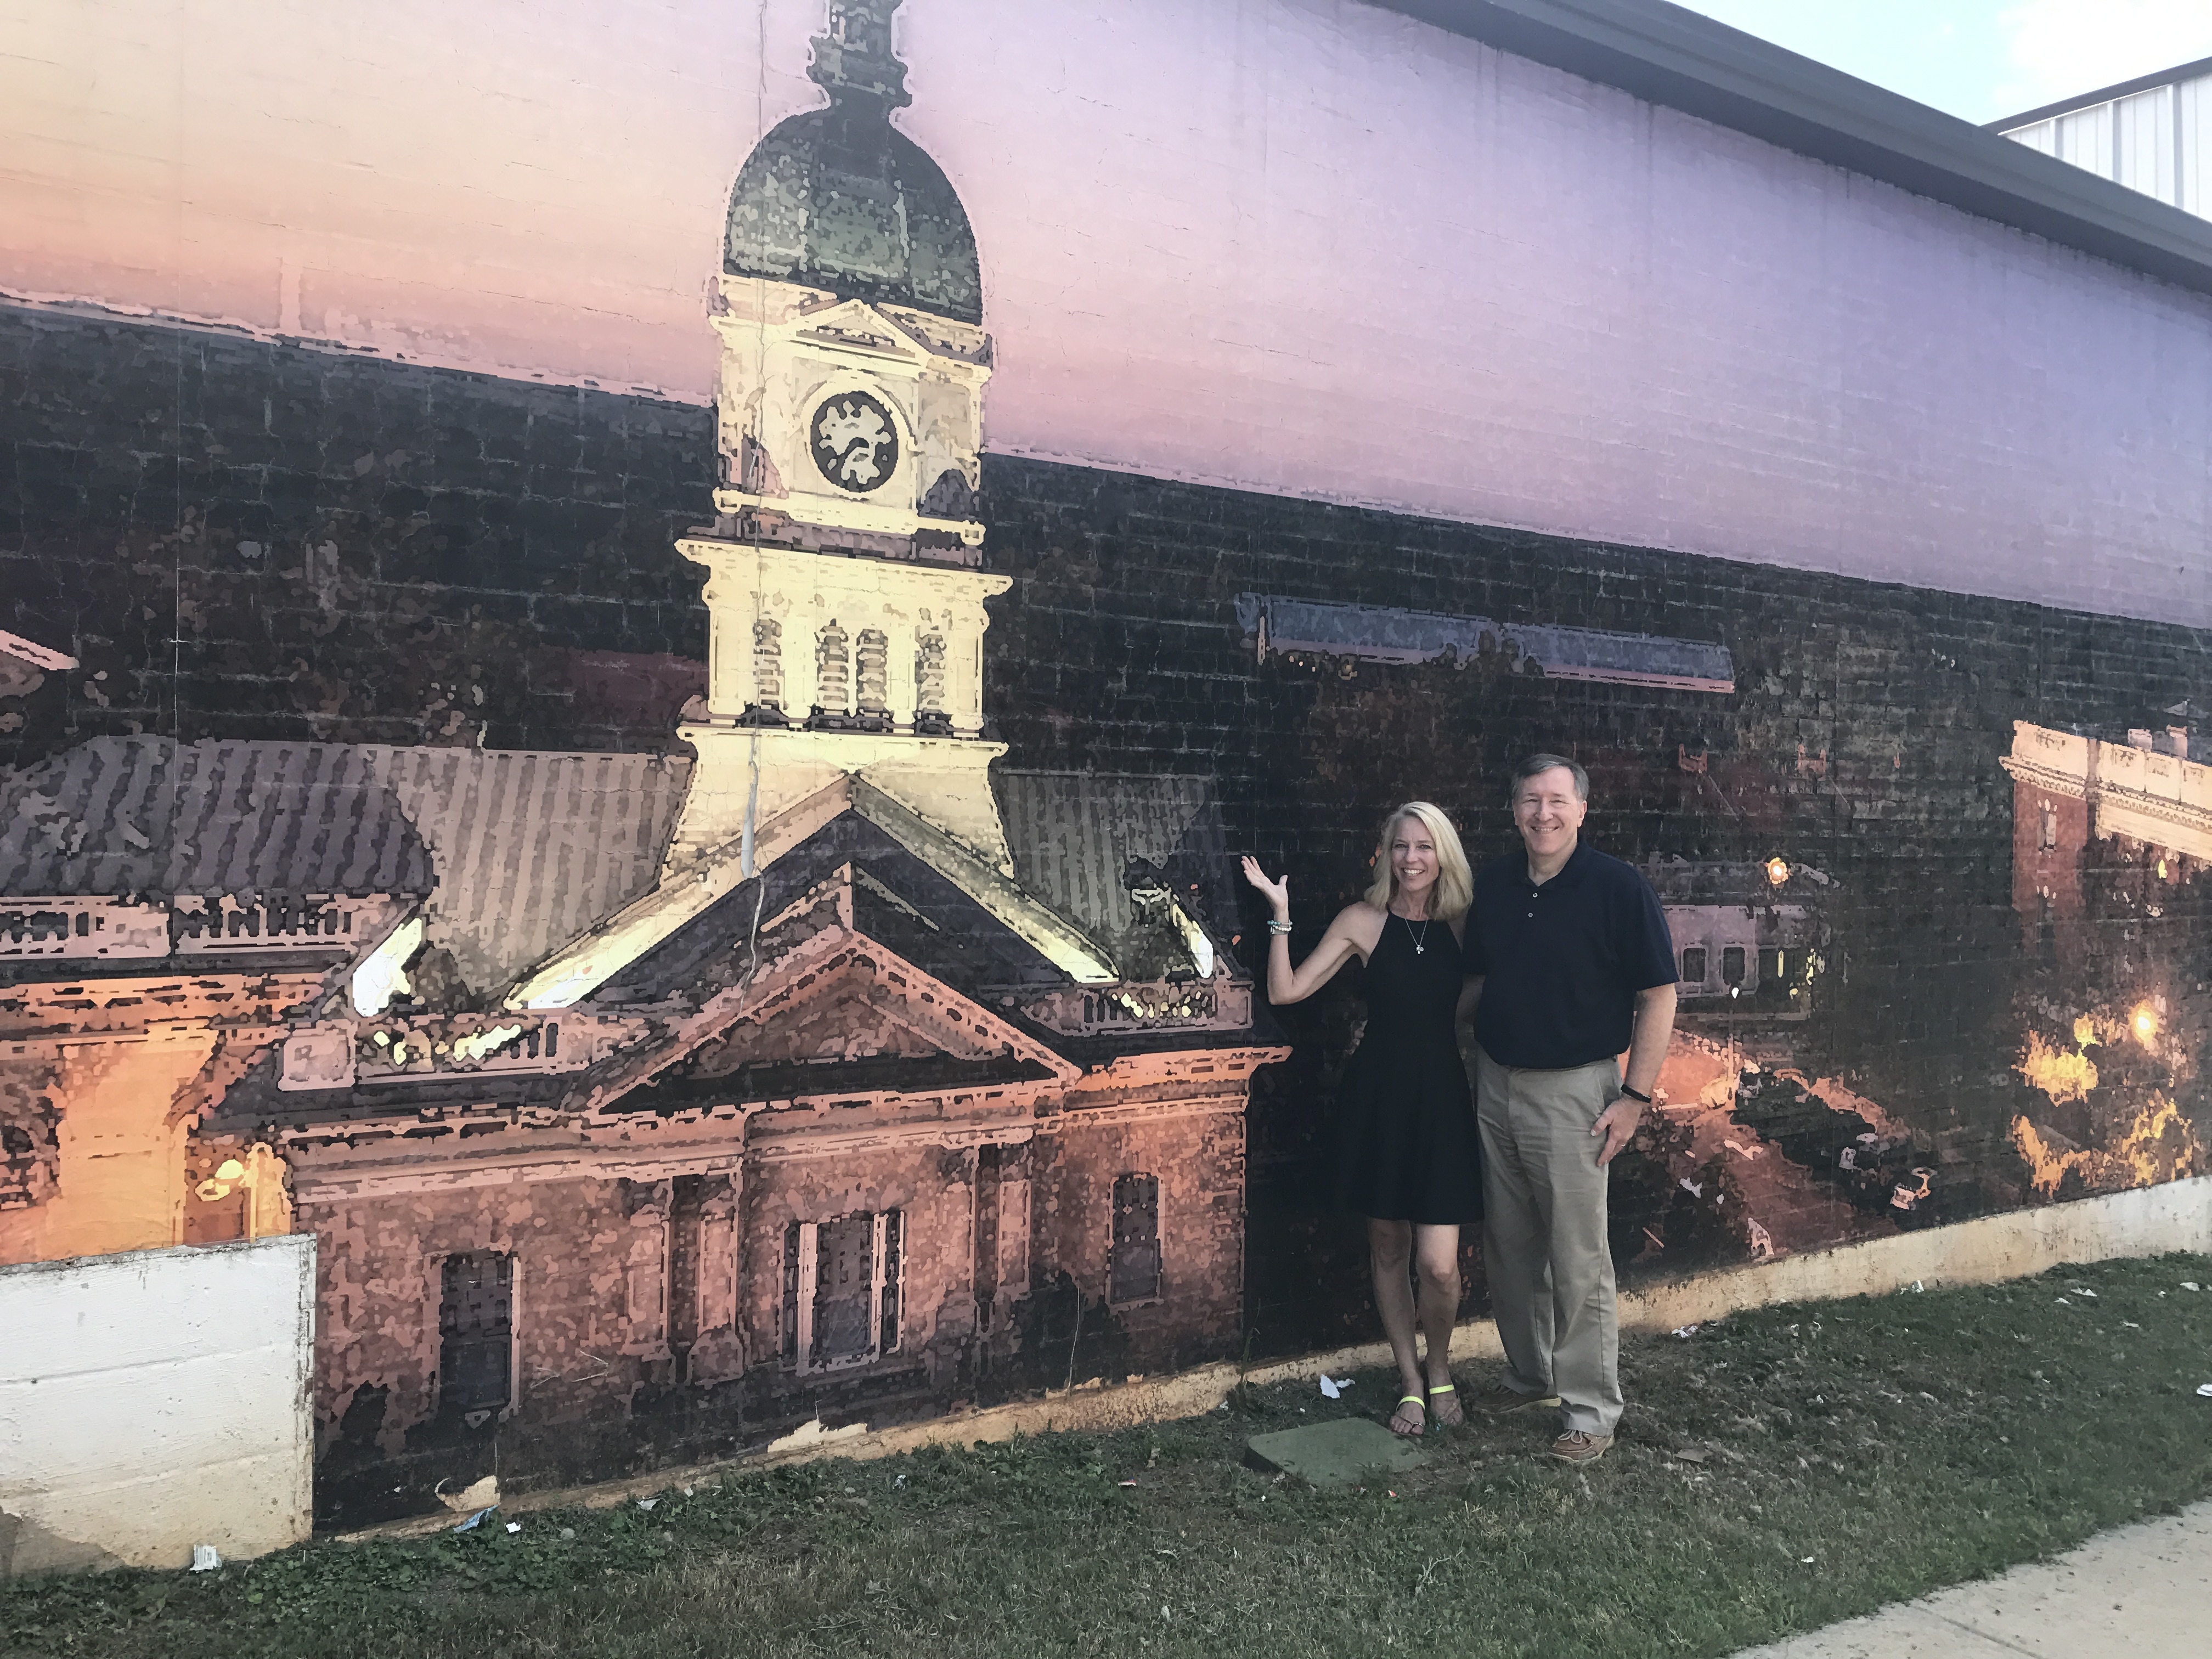 Located on the back of Dollar General this mural is of Athens.